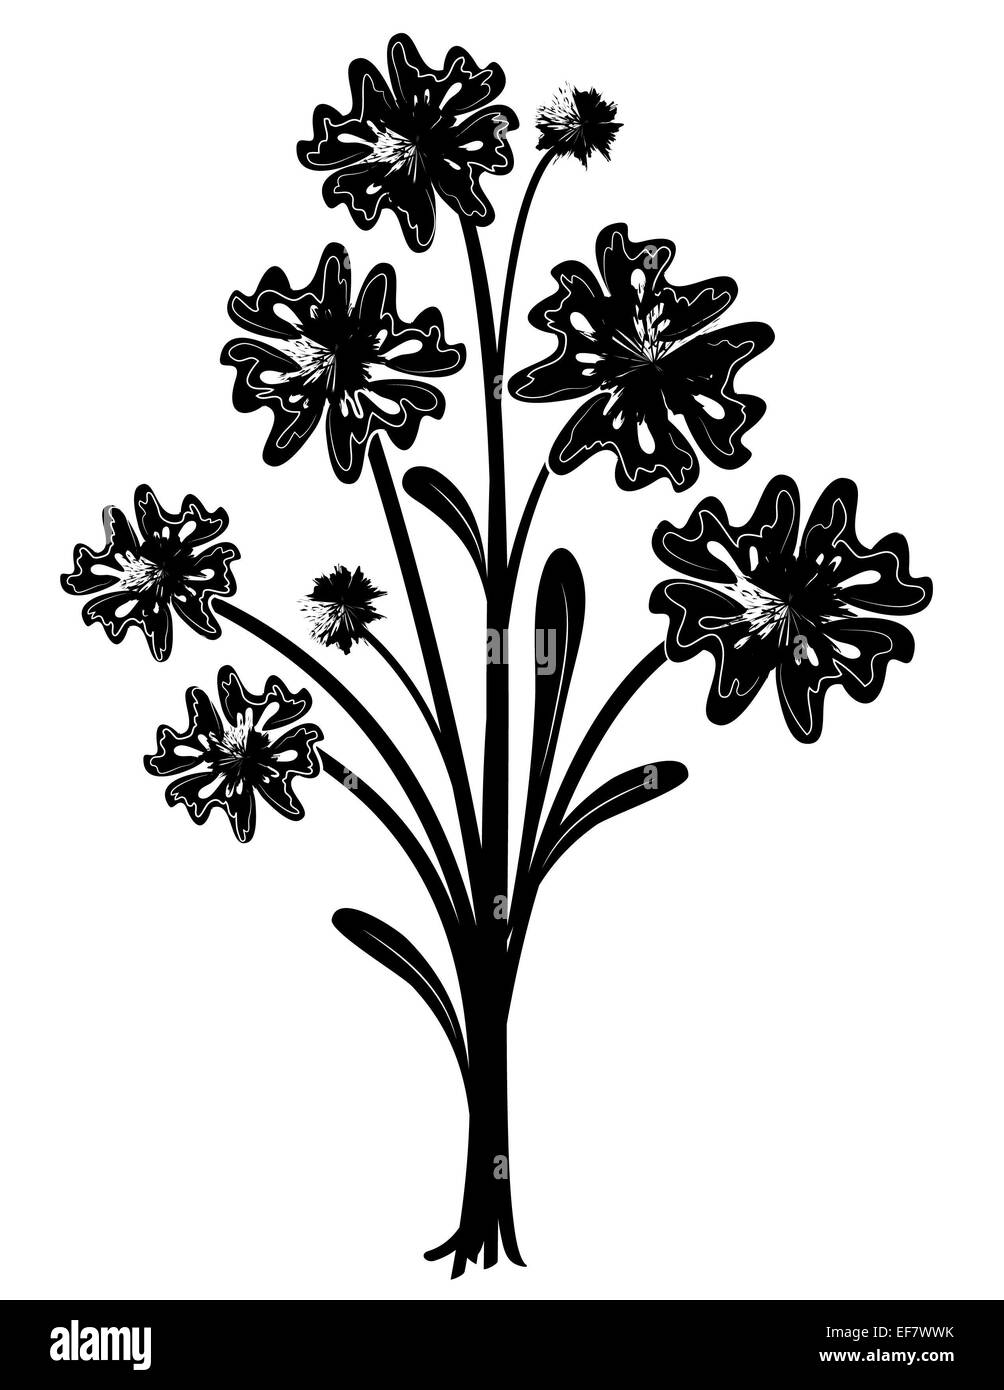 Black and white illustration of a bouquet of eight flowers with playful leaves ready to put in a vase Stock Photo